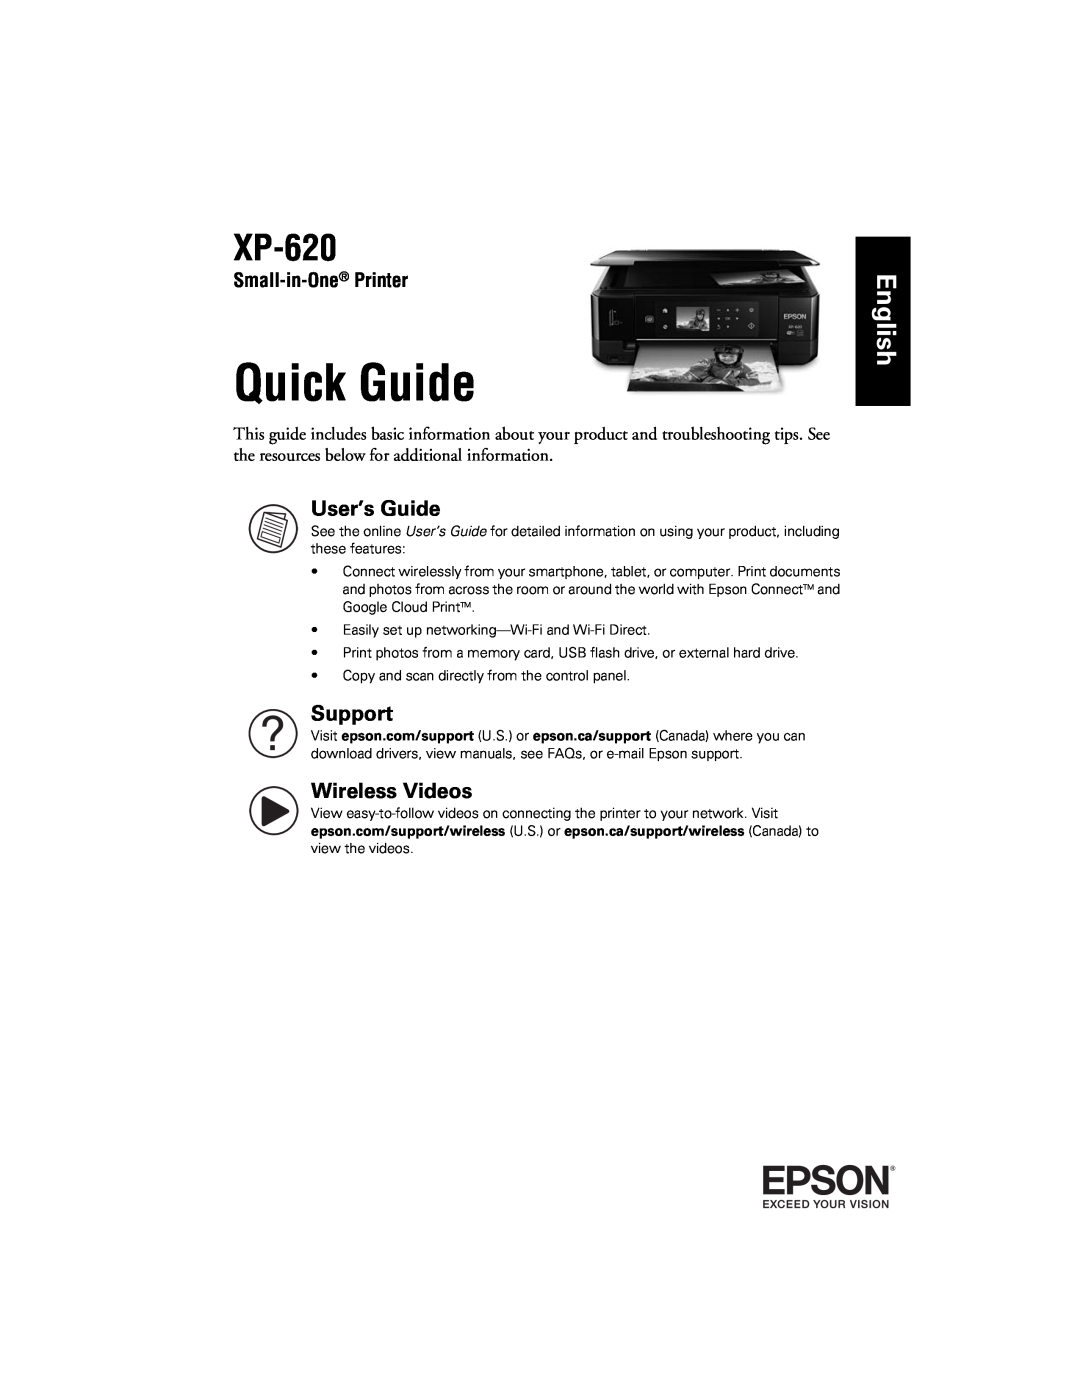 Epson XP-620 manual Quick Guide, English, User’s Guide, Support, Wireless Videos, Small-in-One Printer 